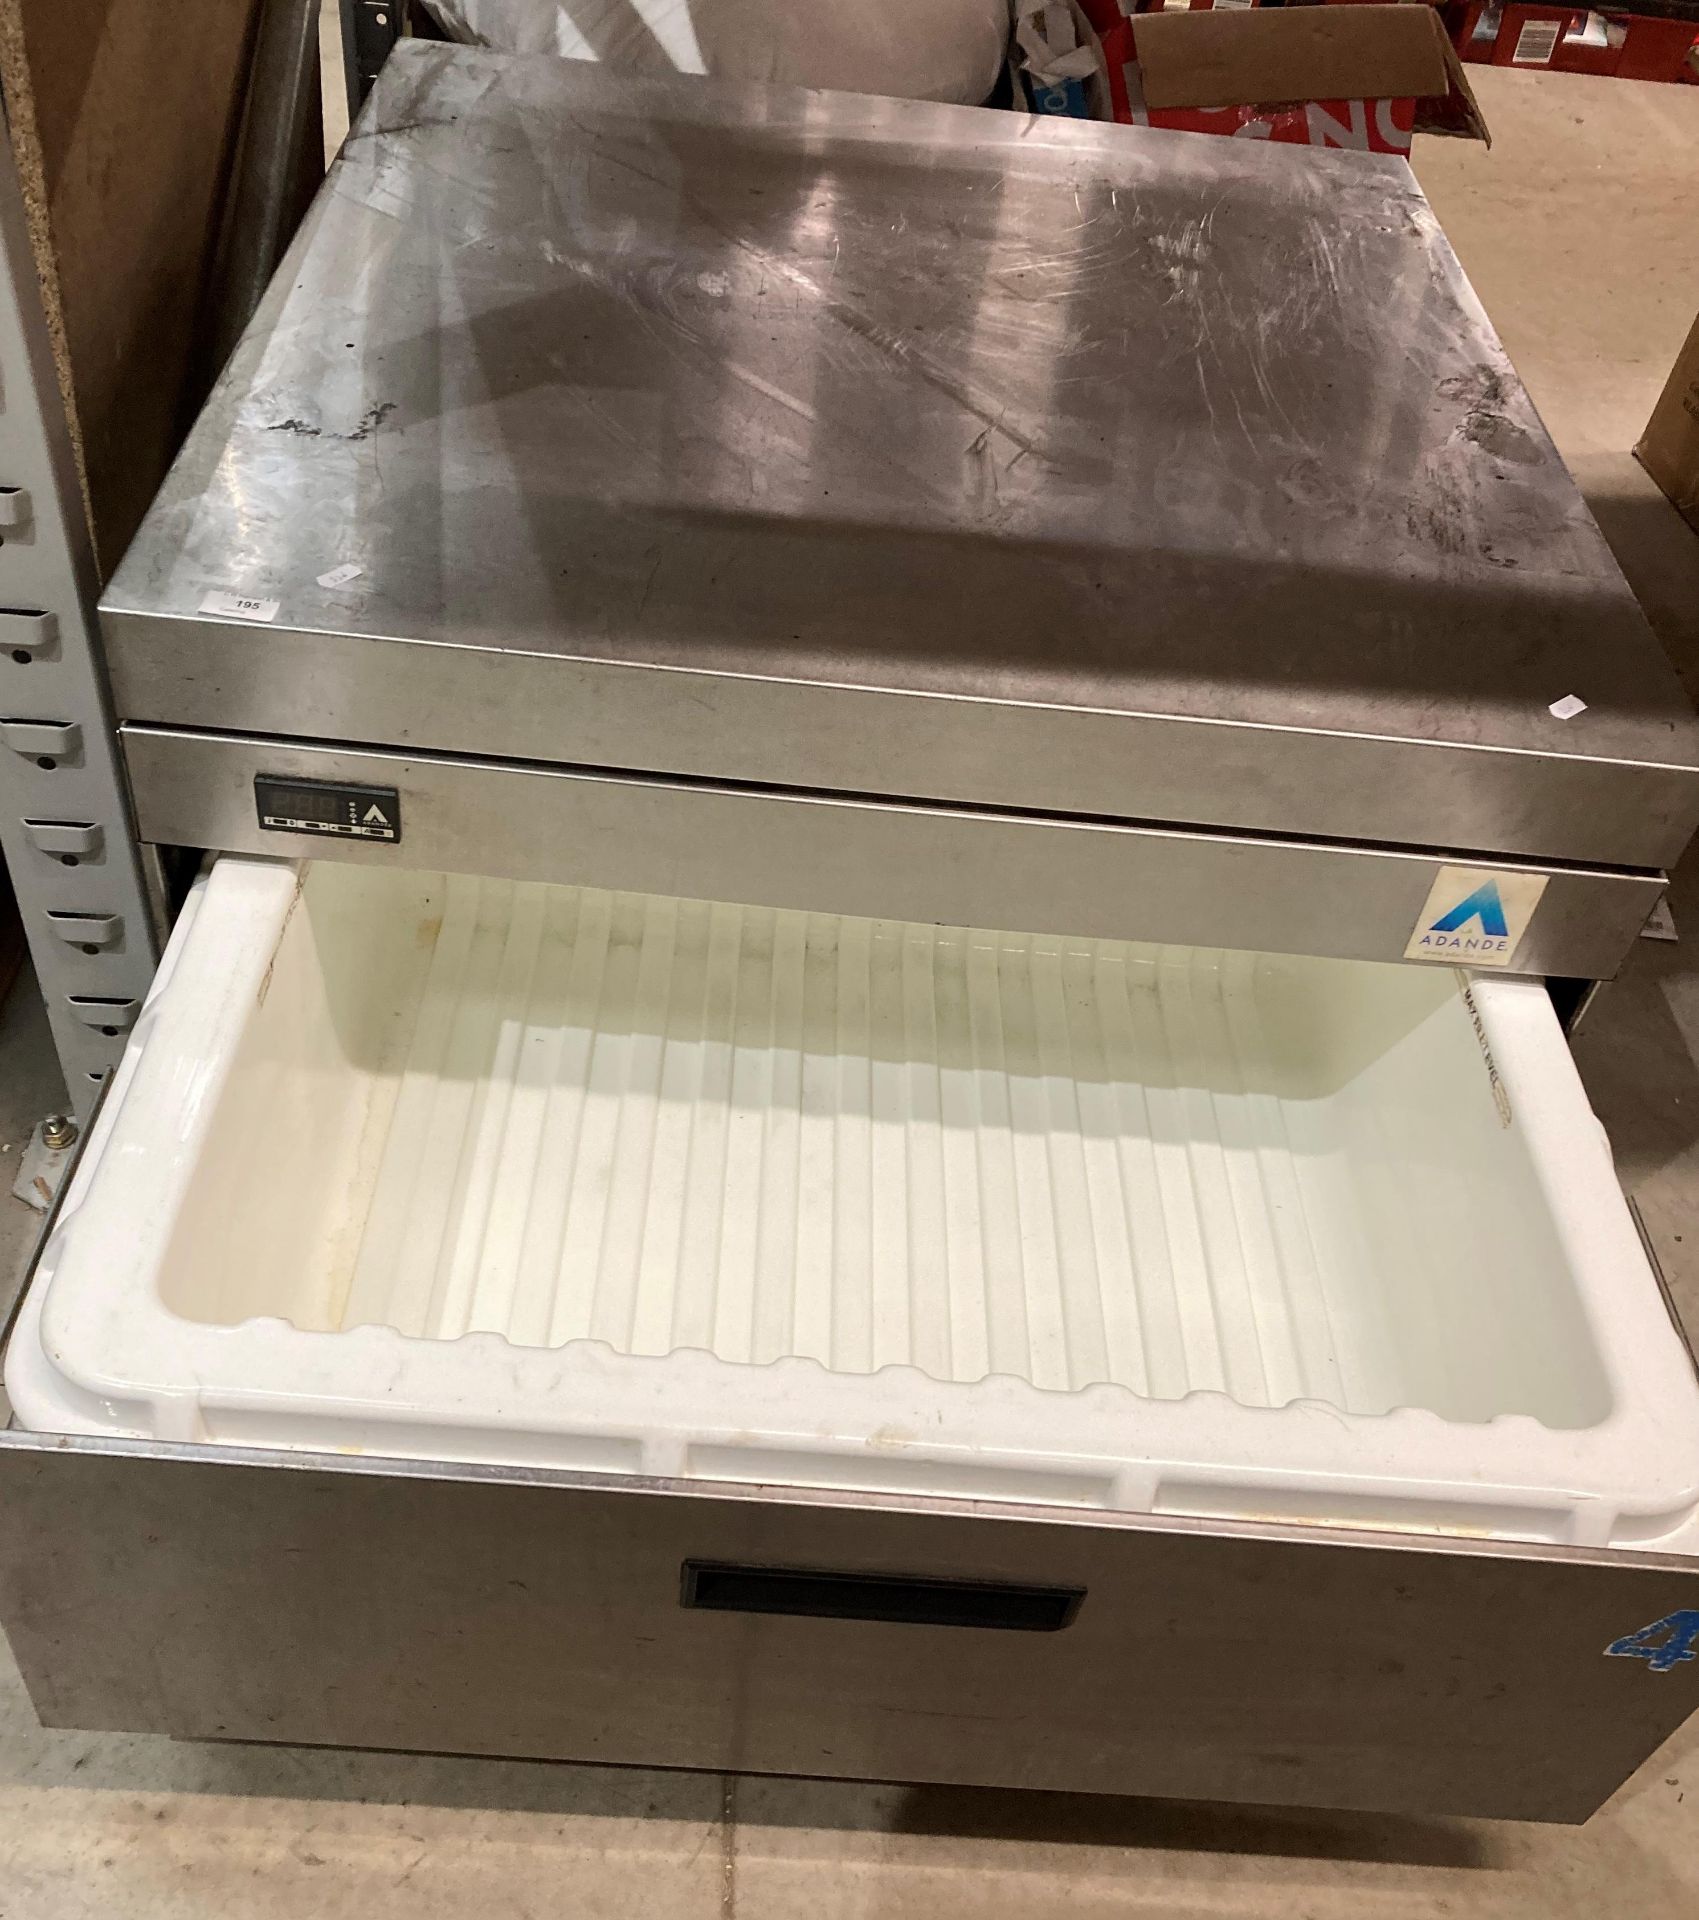 Adande stainless steel mobile refrigerated drawer (as seen - failed insulation test and current - Image 2 of 2